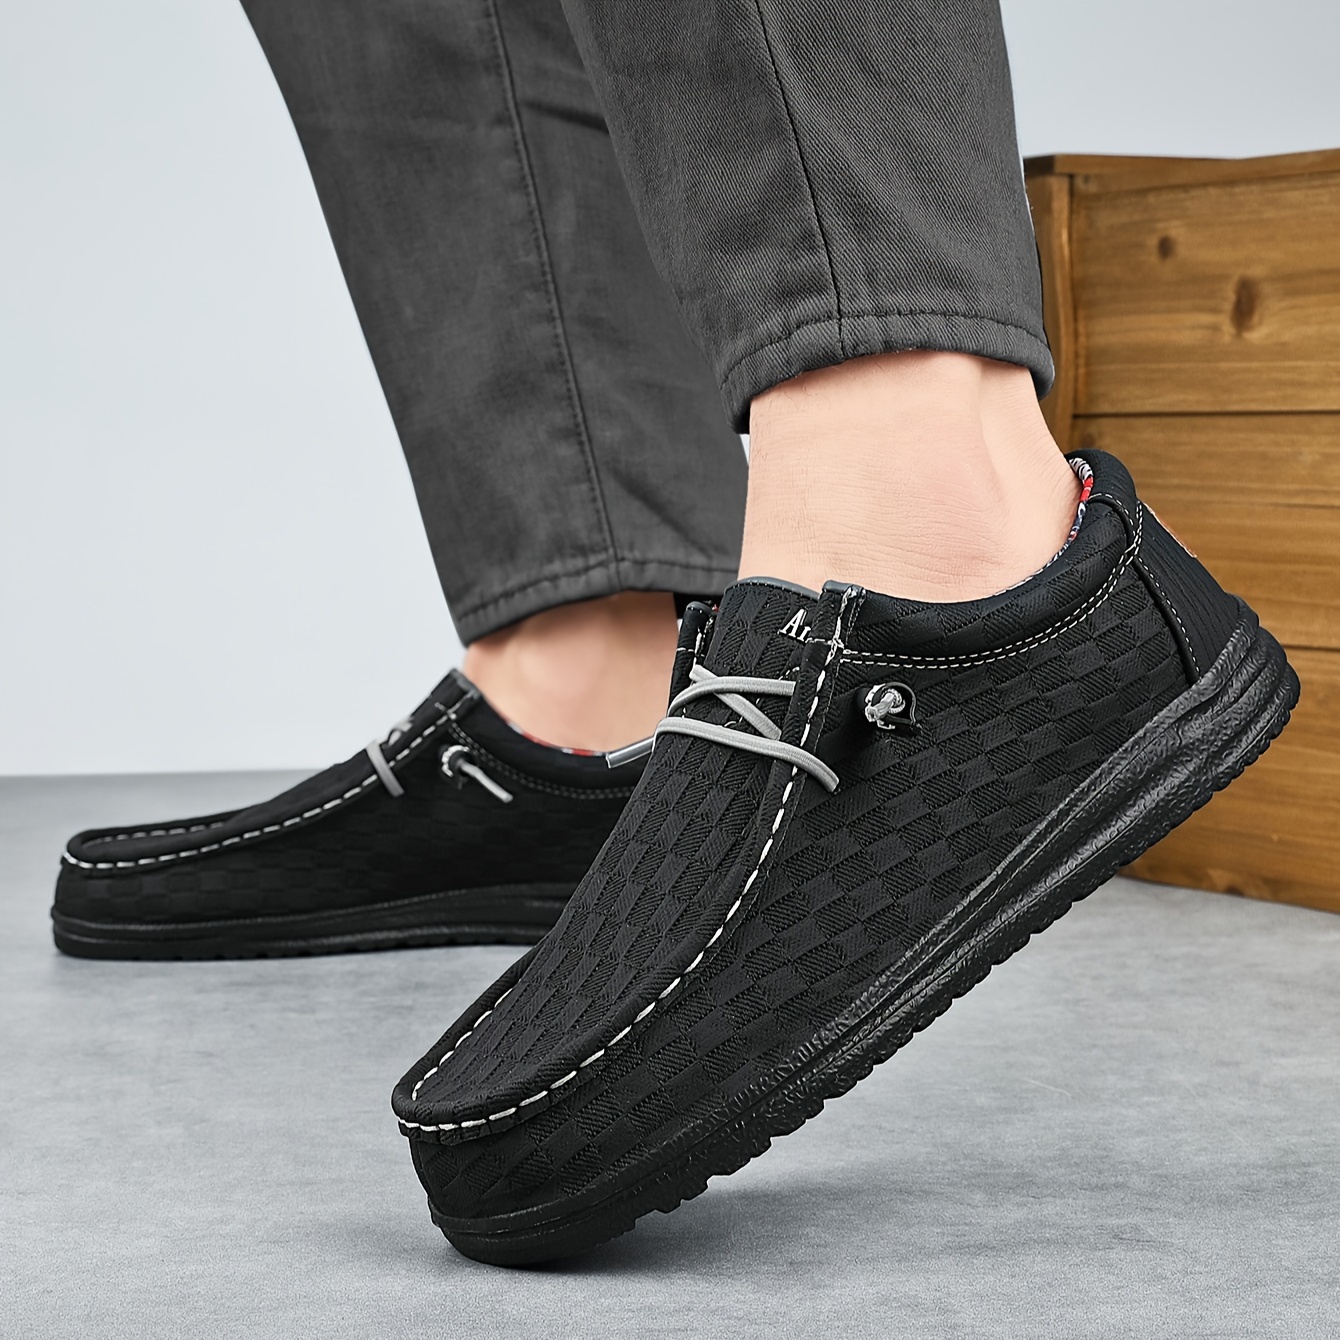 plus size mens solid casual loafers with pu leather uppers wear resistant lightweight slip on versatile shoes for outdoor walking driving shop the latest trends